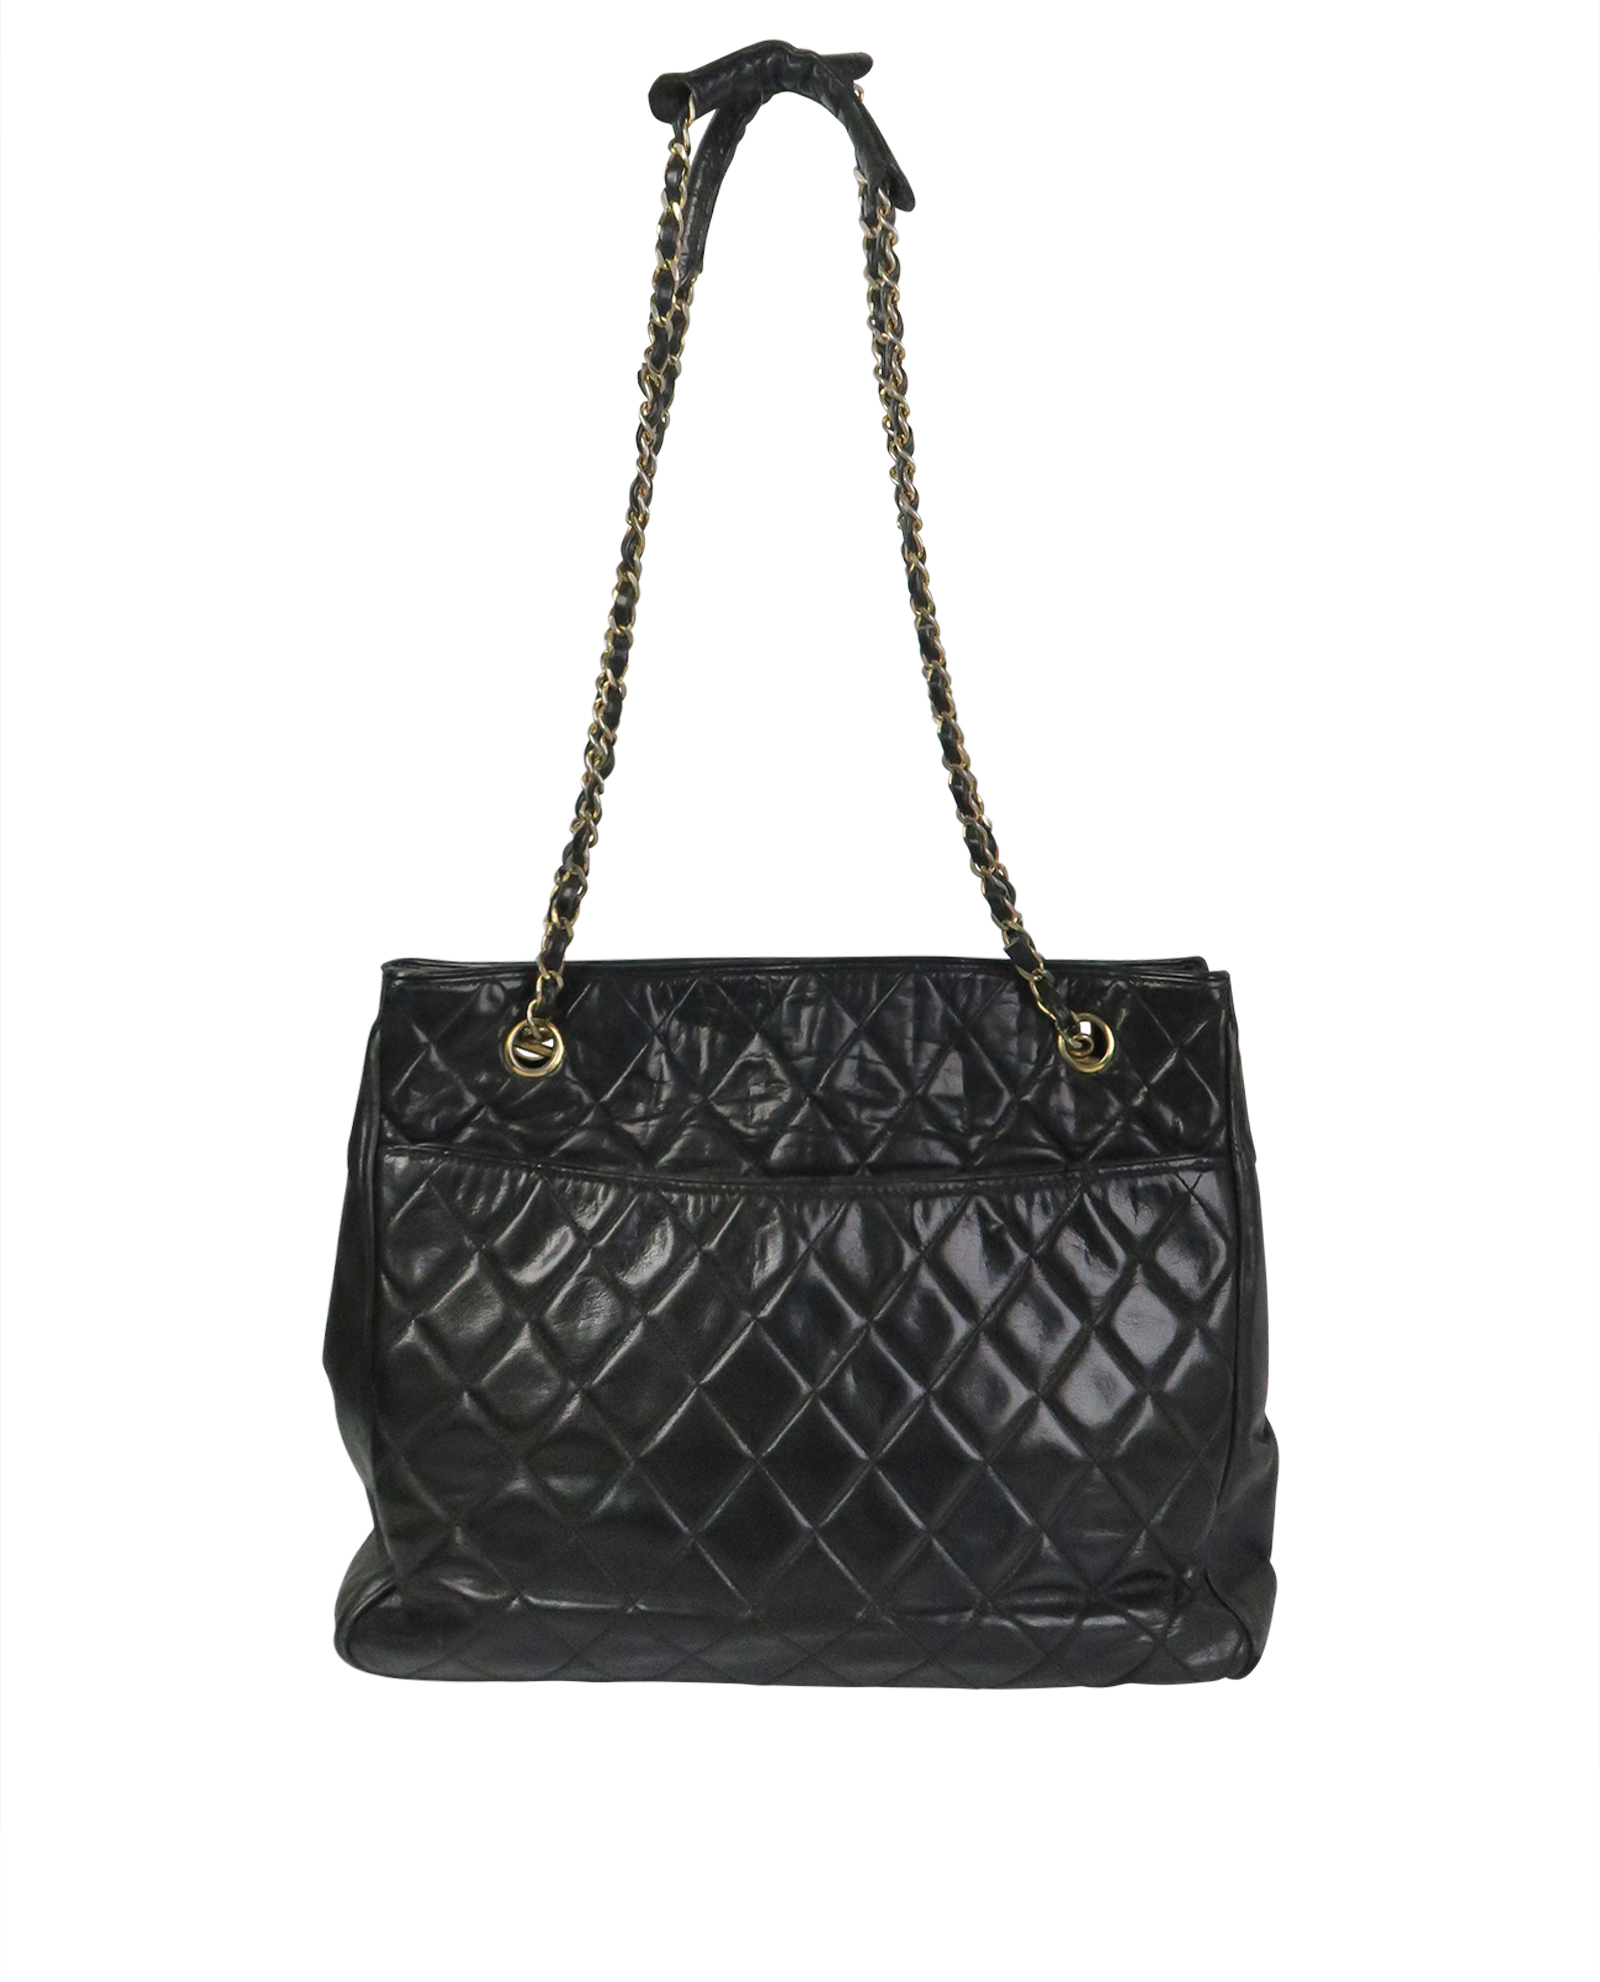 MARC BY MARC JACOBS Black Leather Lambskin Quilted Shoulder Bag Purse